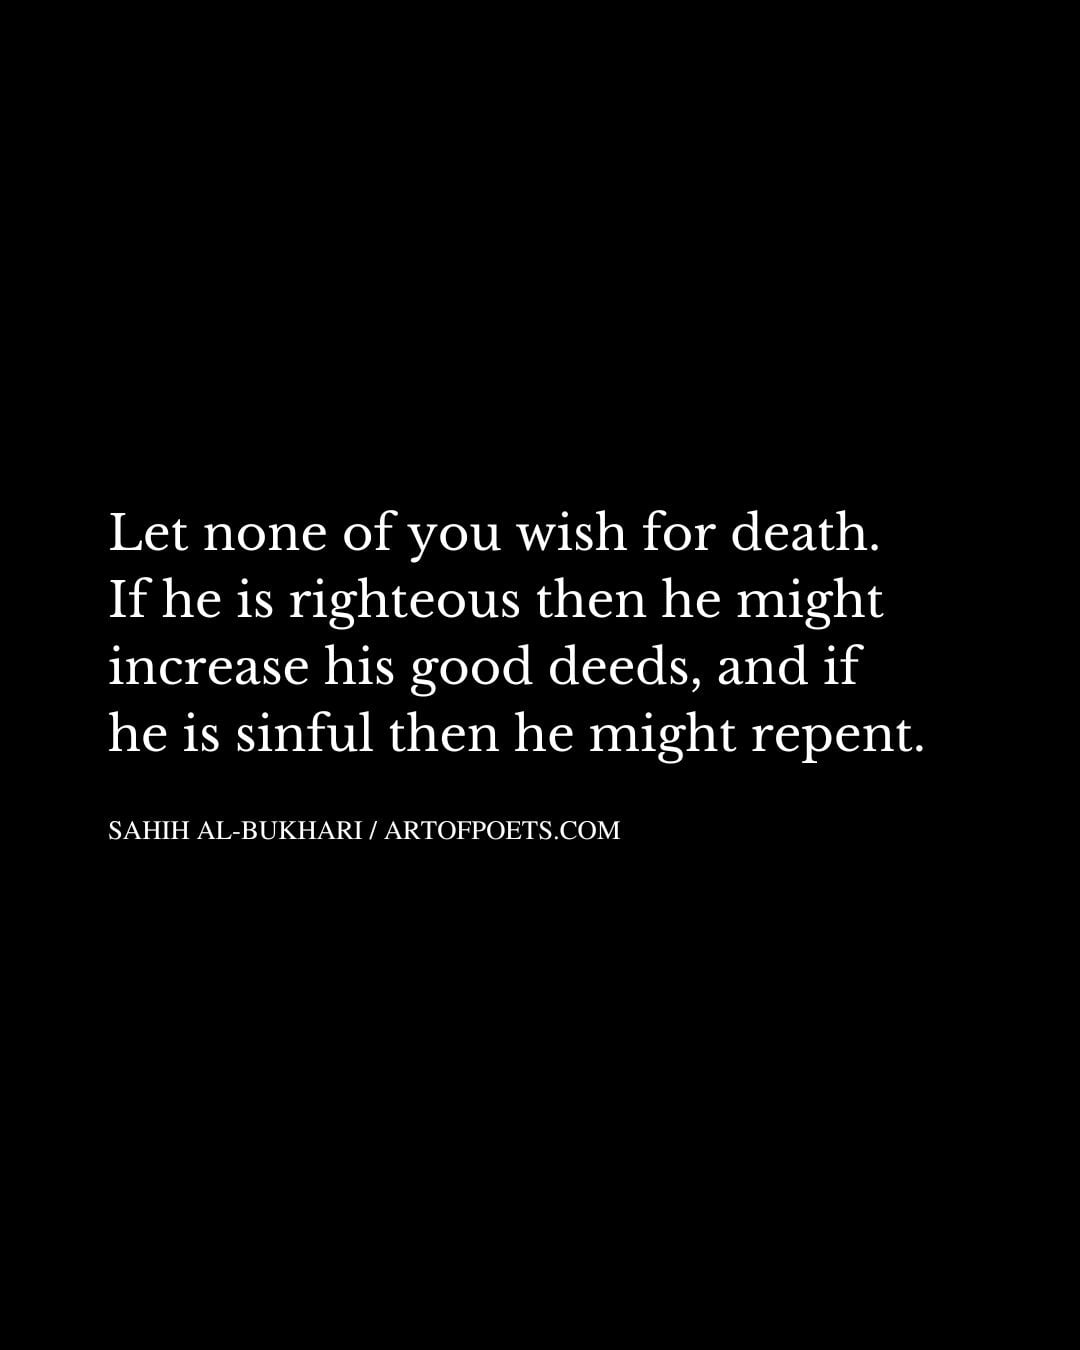 Let none of you wish for death. If he is righteous then he might increase his good deeds and if he is sinful then he might repent